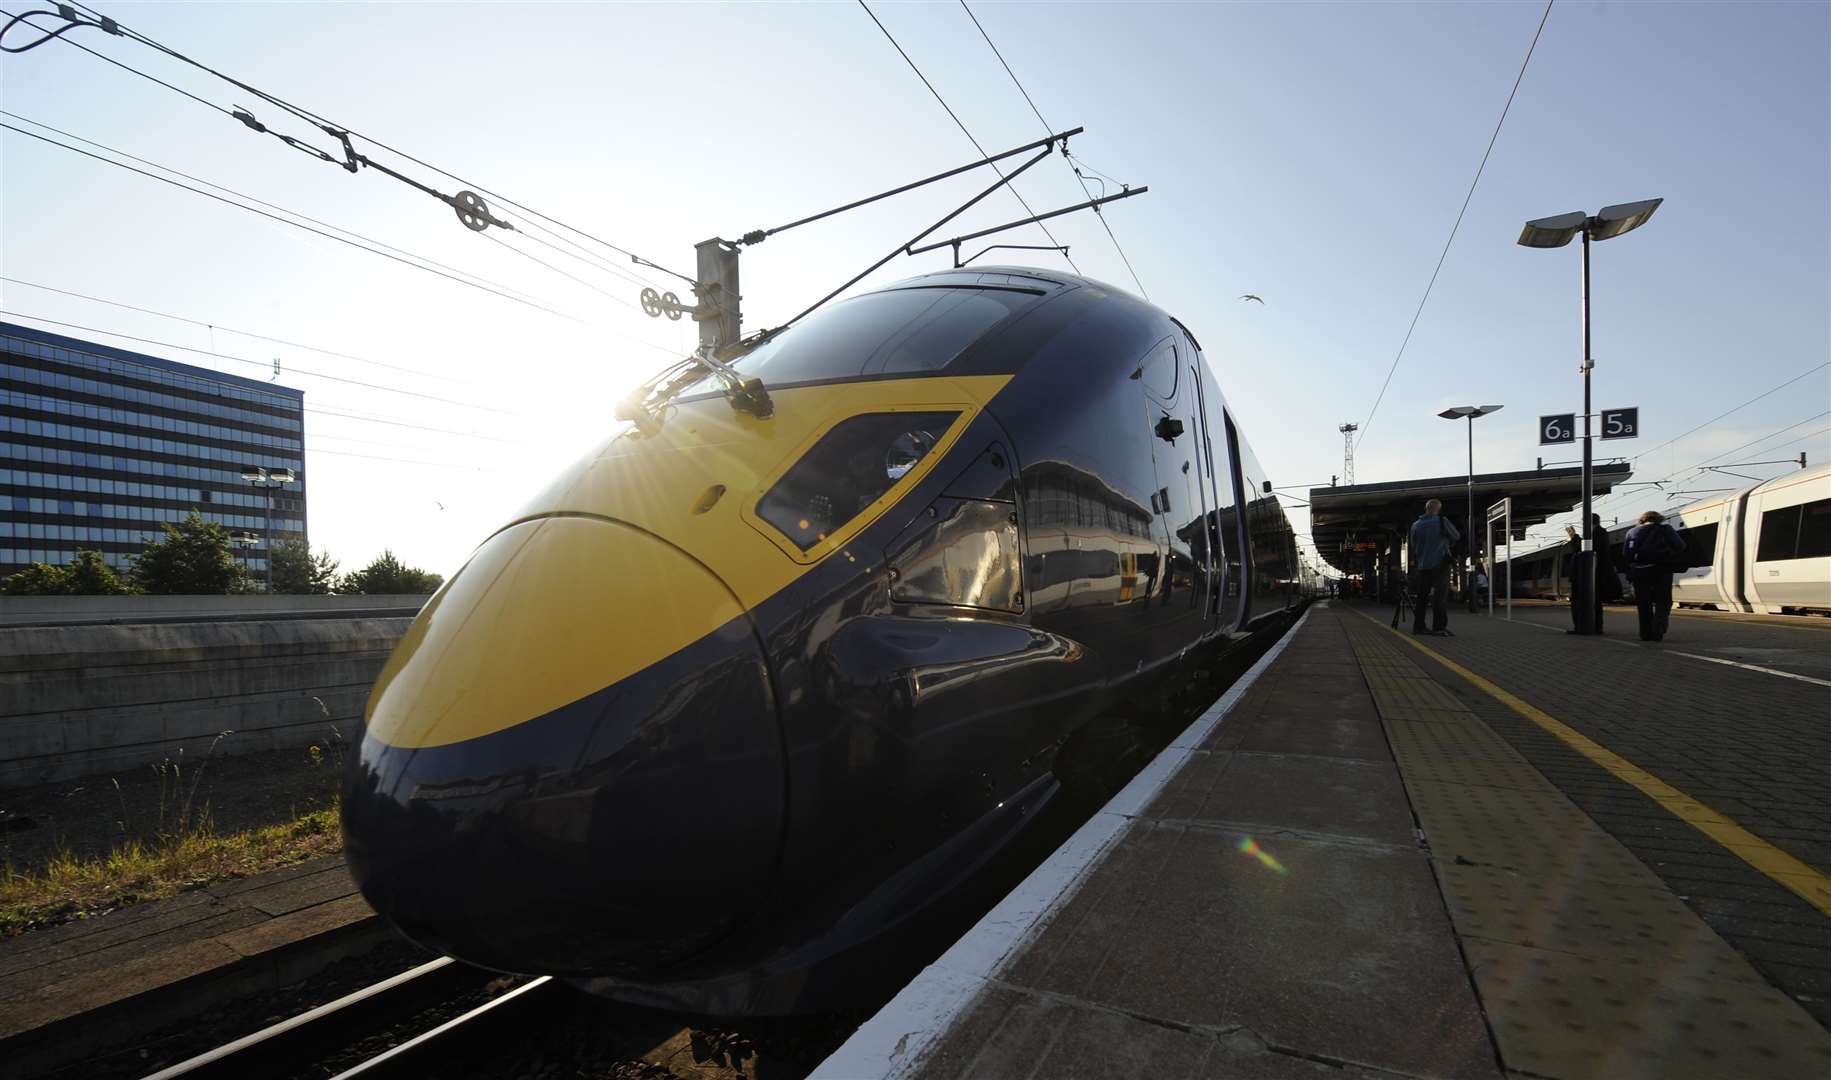 The high-speed train at Ashford International. Picture: Barry Goodwin